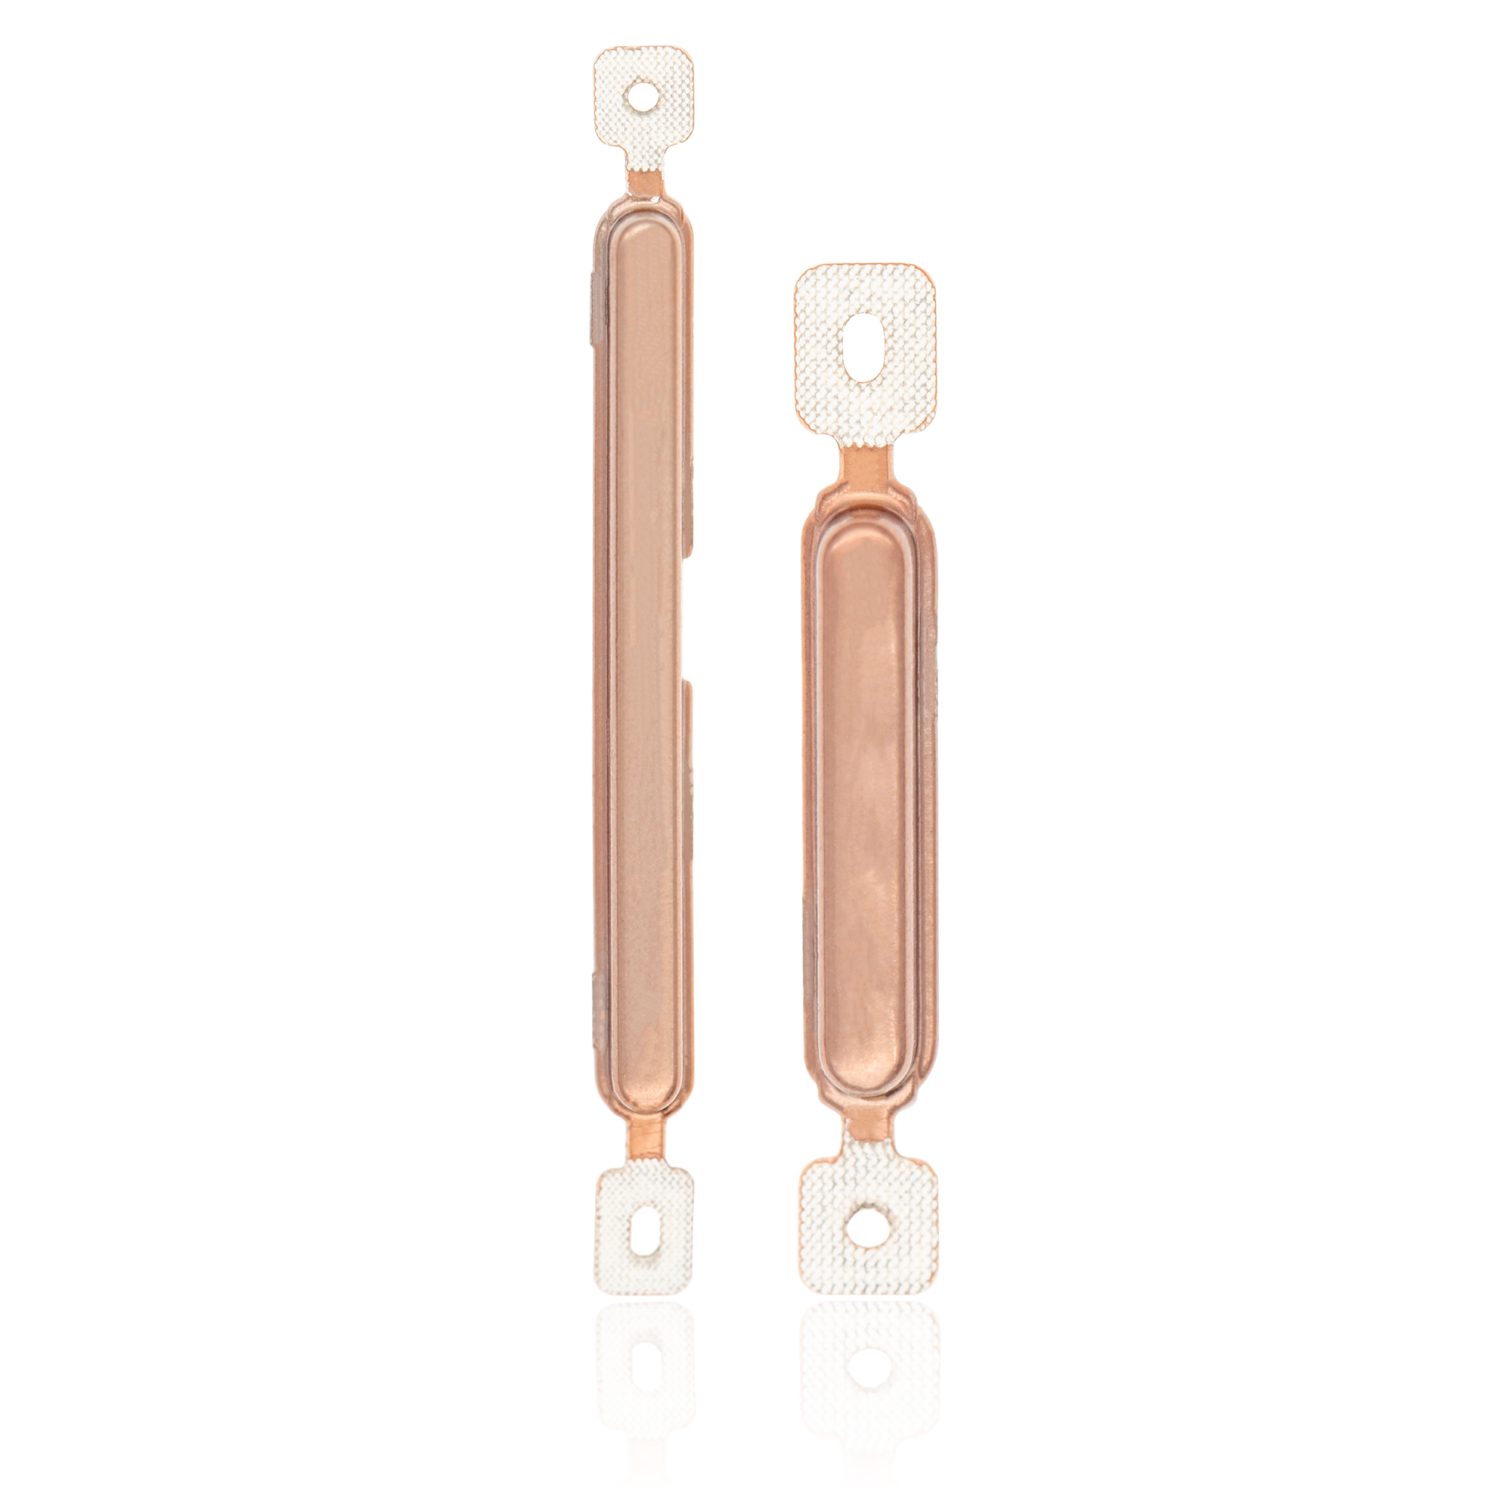 Replacement Hard Buttons (Power / Volume) Compatible For Motorola Moto G9 Plus (XT2087 / 2020) (Rose Gold)